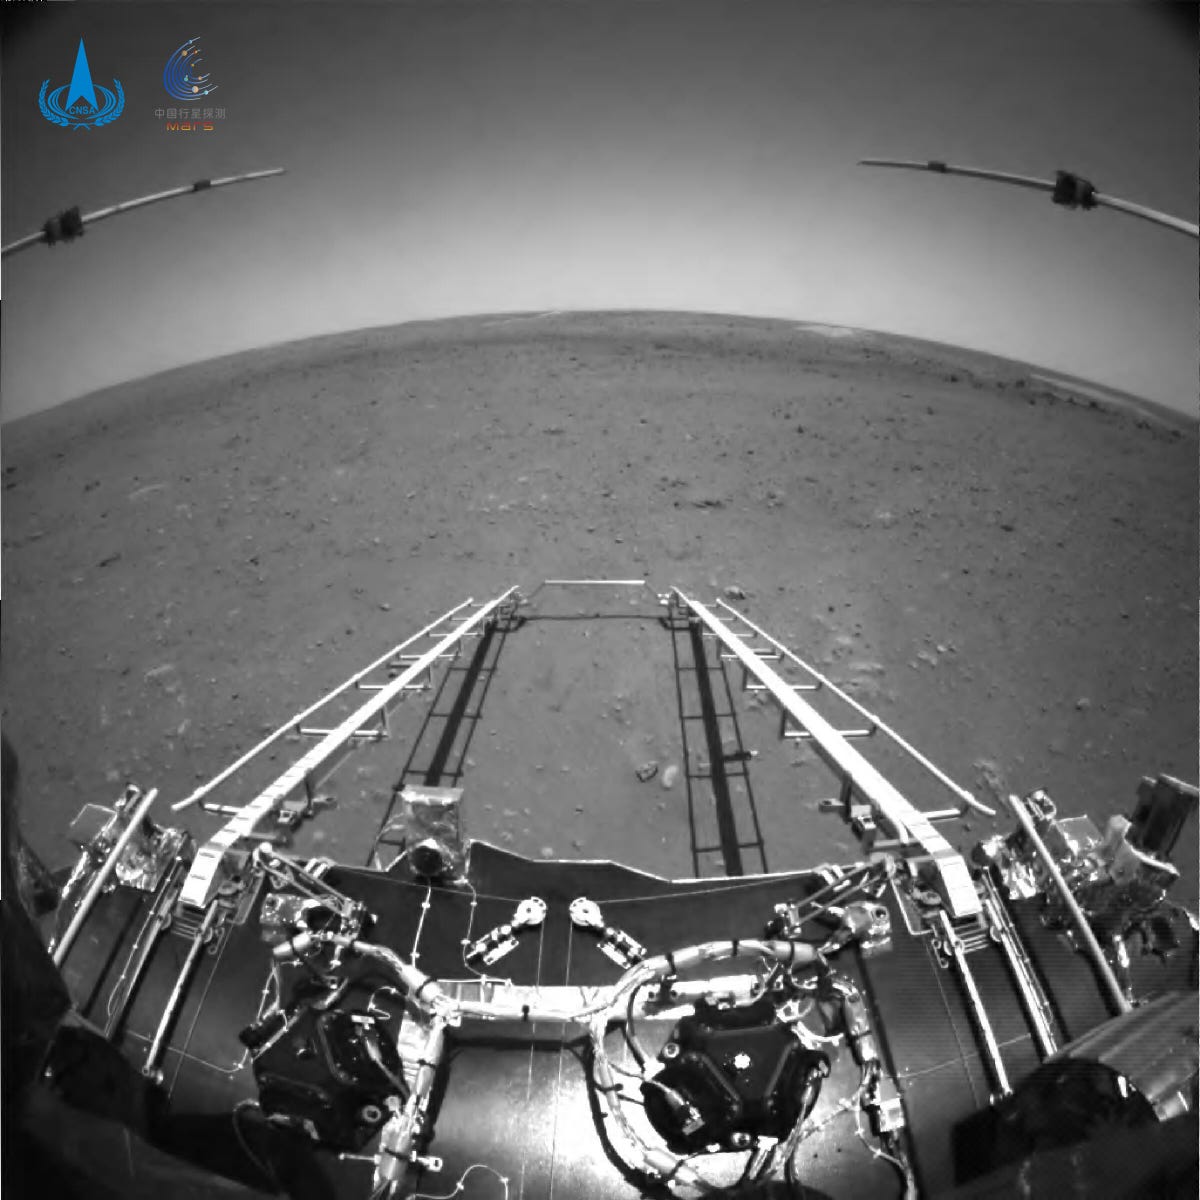 Black-and-white image from the Zhurong Mars rover